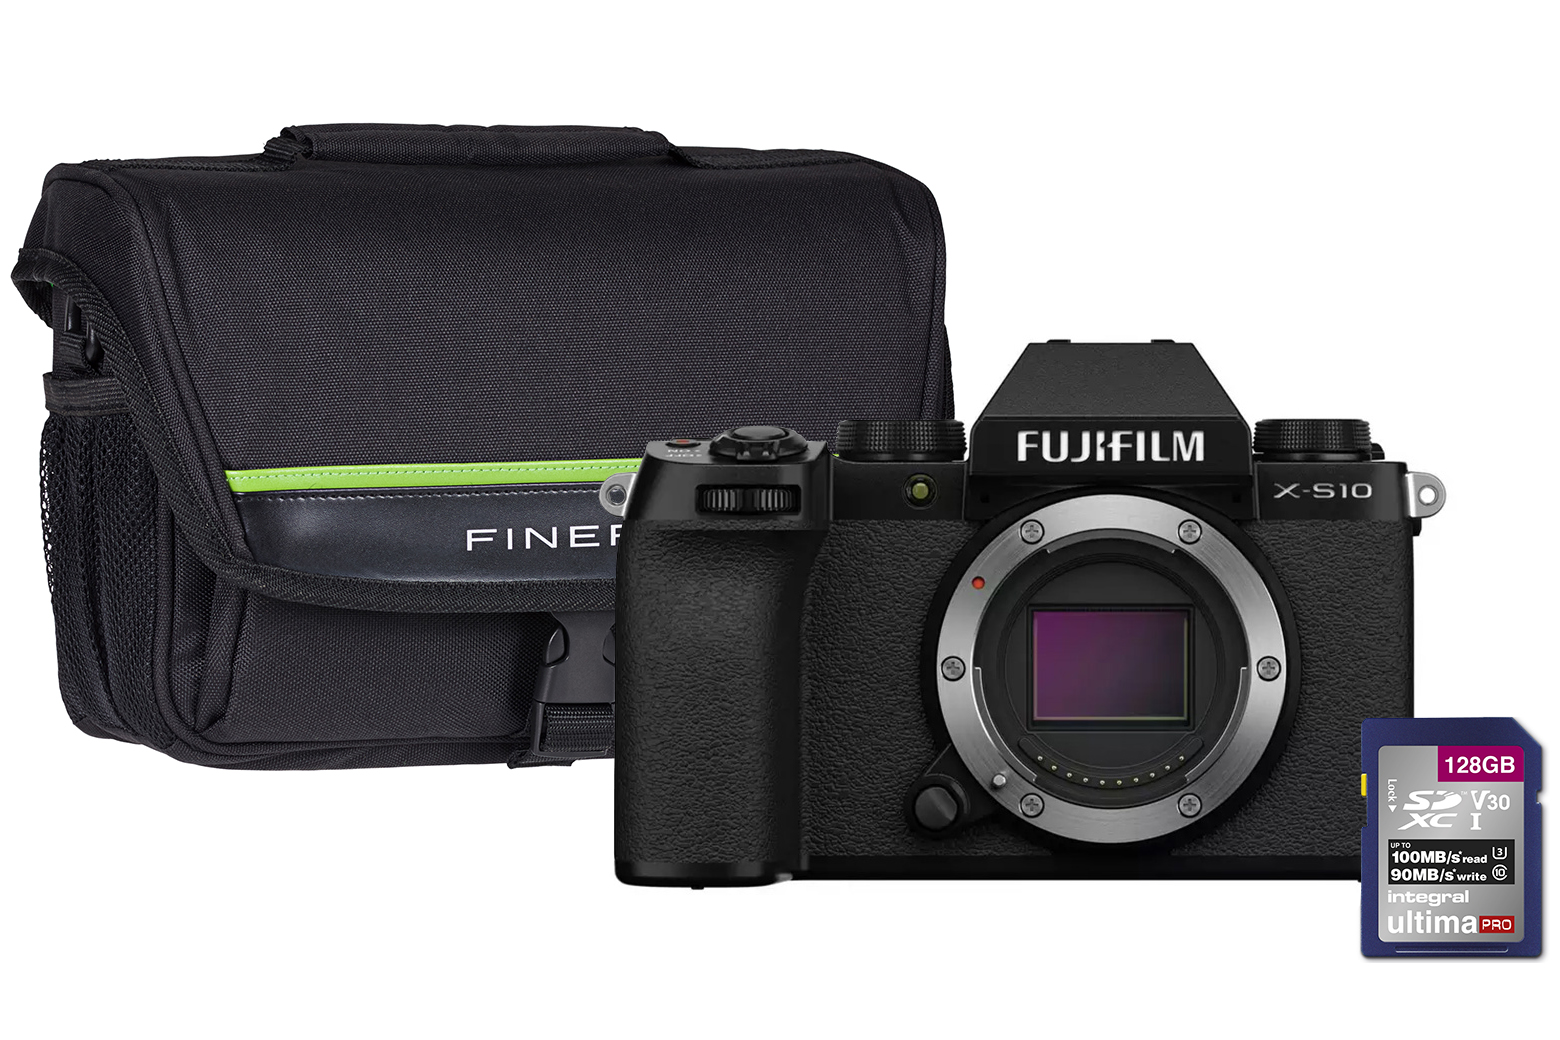 16670041+BAG+128GB FUJI X-S10 Mirrorless Camera with 128GB SD Card & Case - Black, Body Only